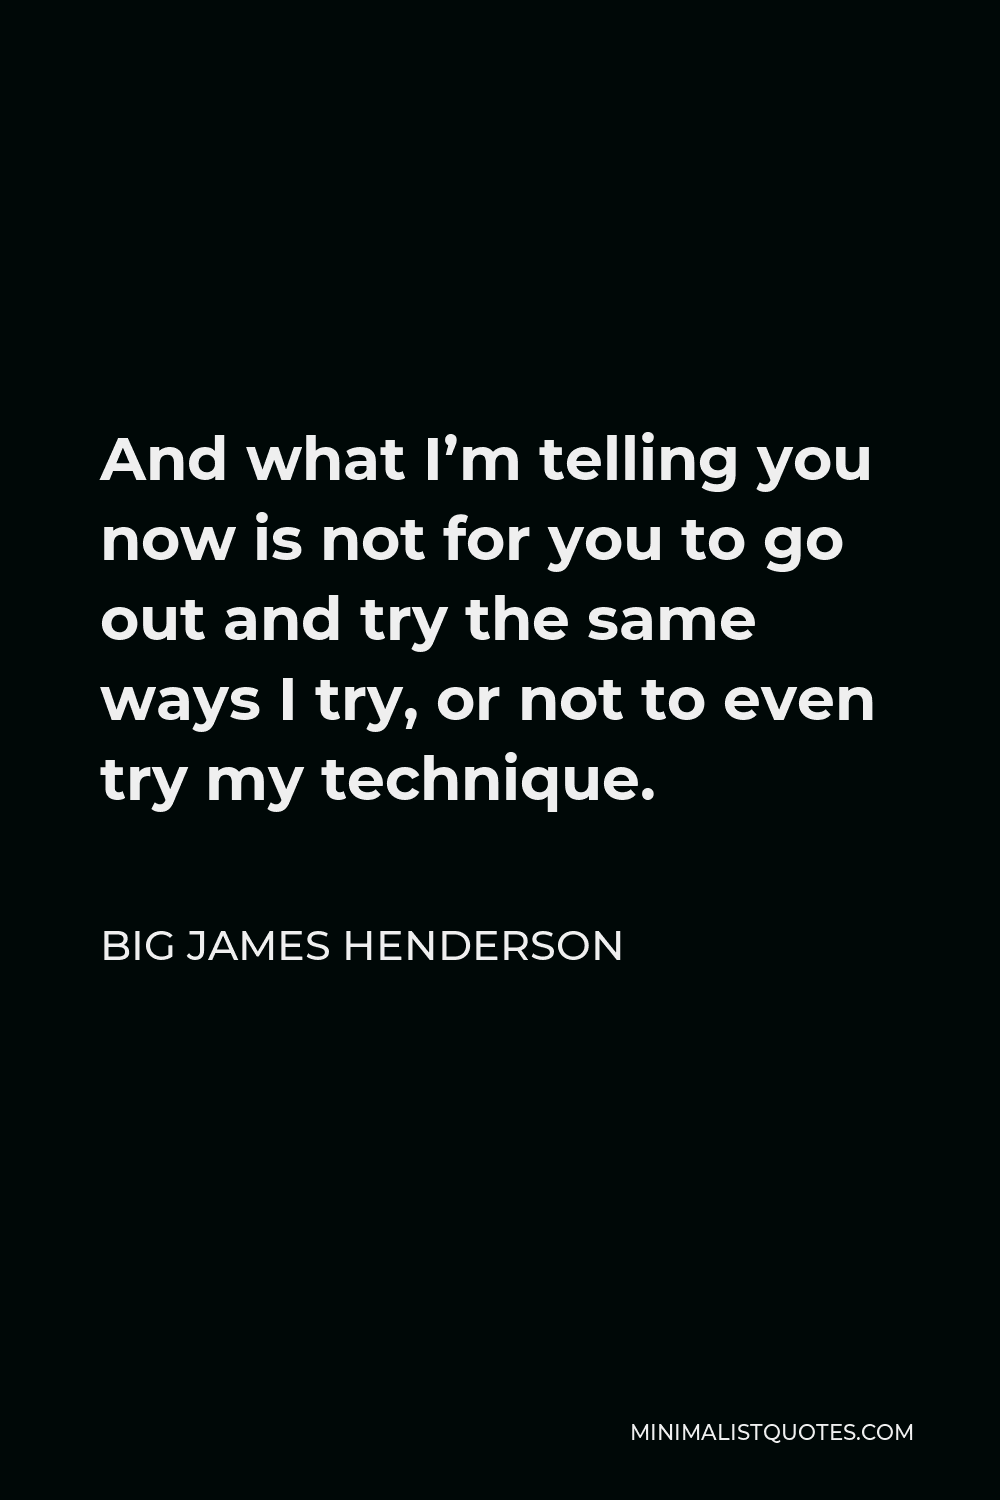 Big James Henderson Quote - And what I’m telling you now is not for you to go out and try the same ways I try, or not to even try my technique.